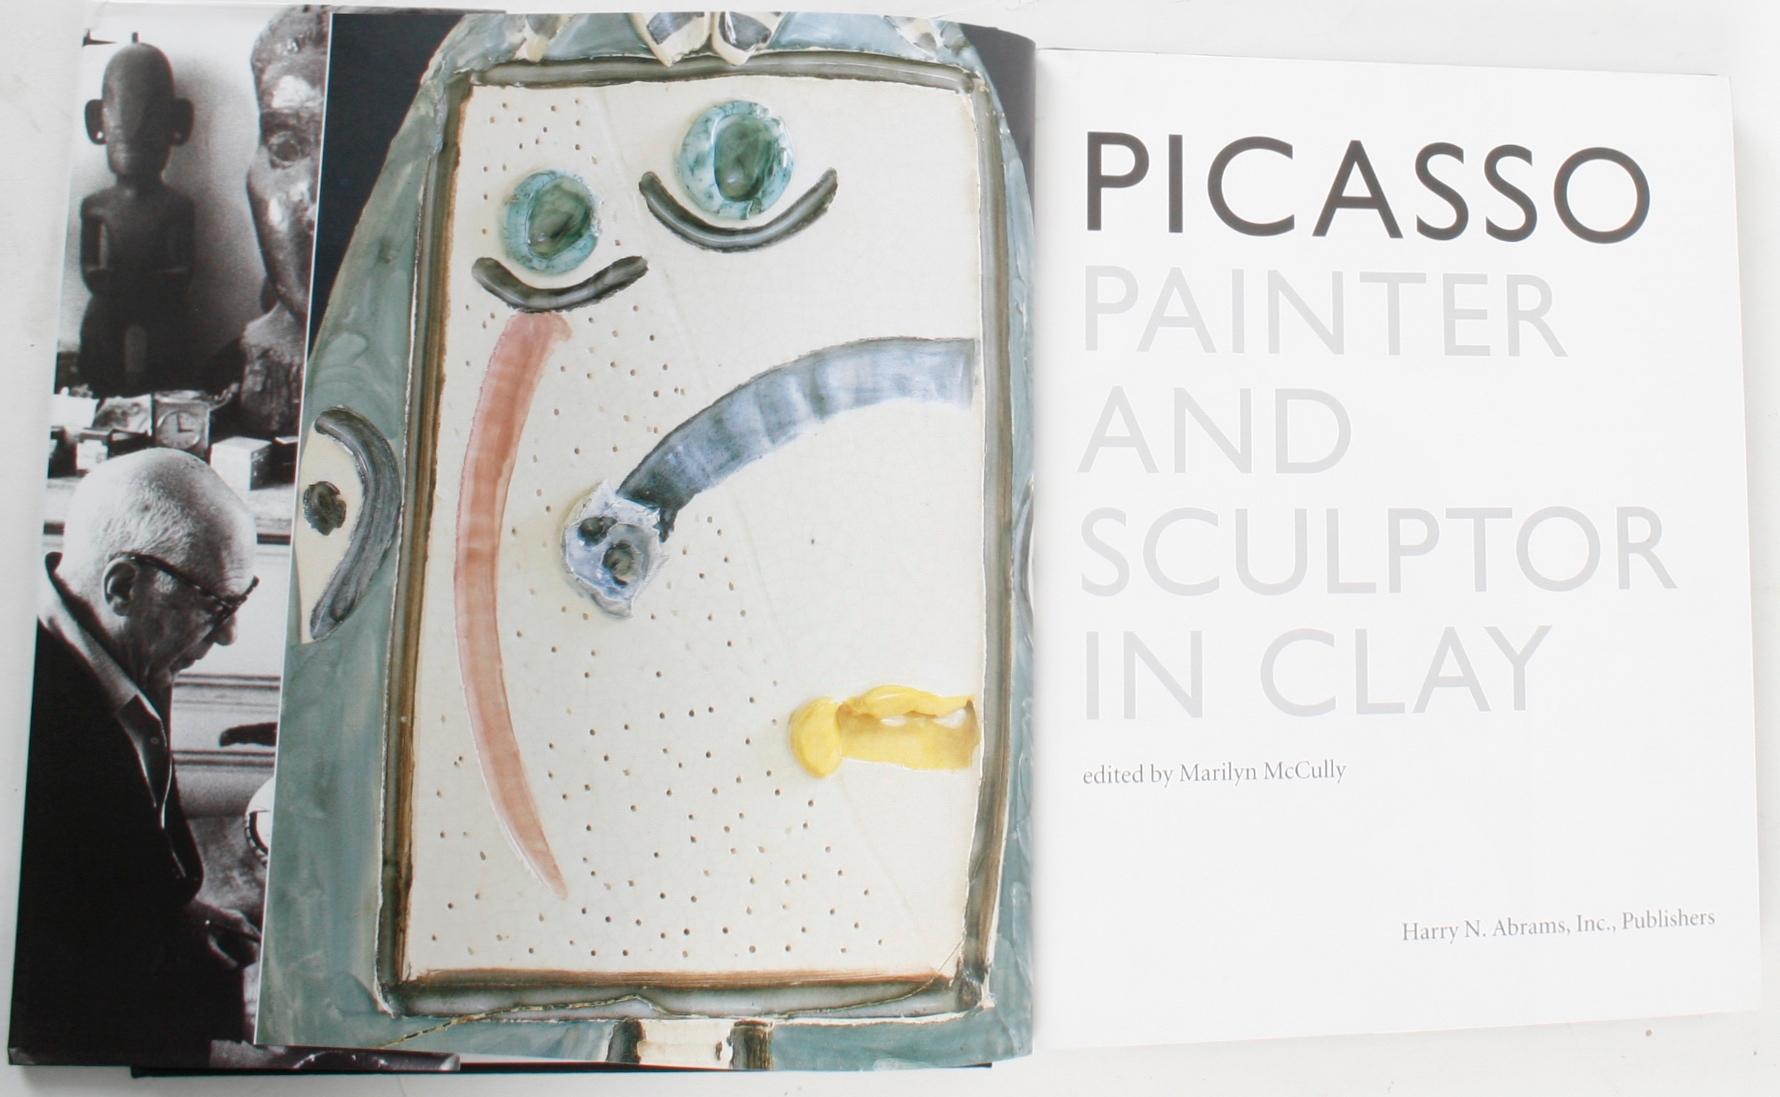 Picasso, painter and sculptor in clay. New York: Harry N. Abrams, Inc., 1998. First Edition Exhibition Catalogue hardcover with dust jacket. 263 pp. A book published on the occasion of the exhibition by the same name at the Royal Academy of Art,